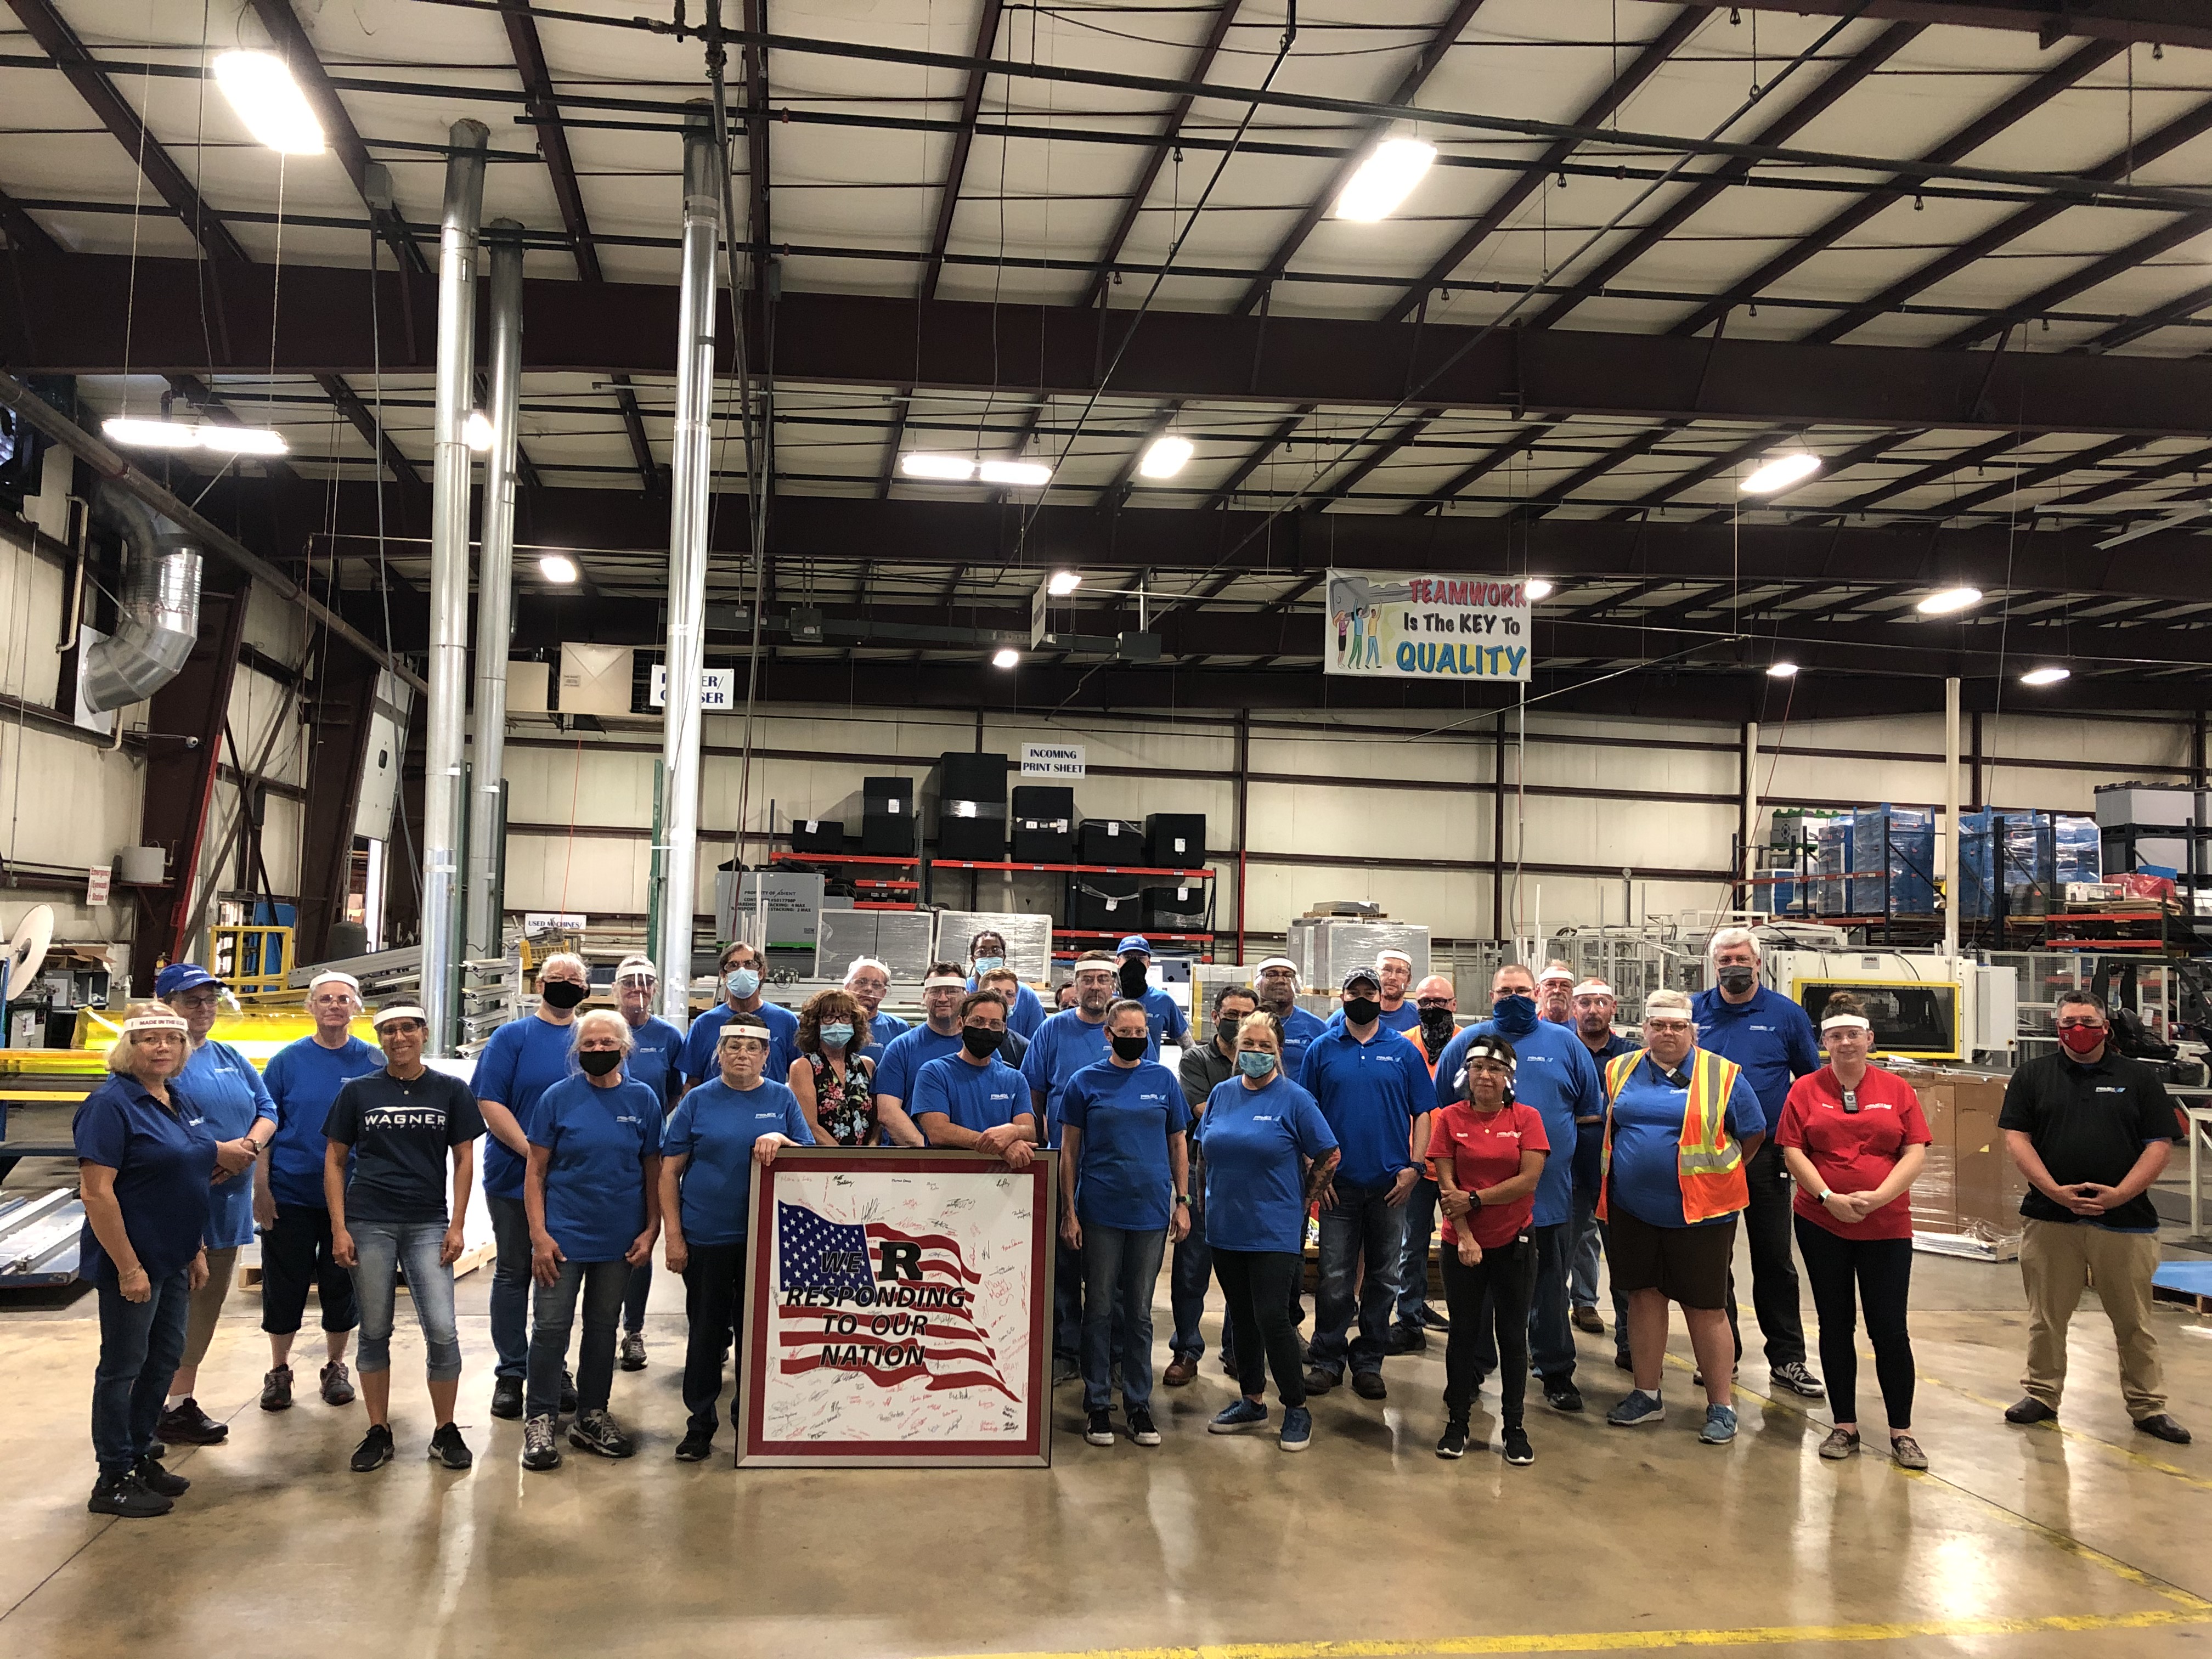 Primex employees are proud of their involvement in fighting Covid-19. They are holding an American flag they all signed during a recent shift.